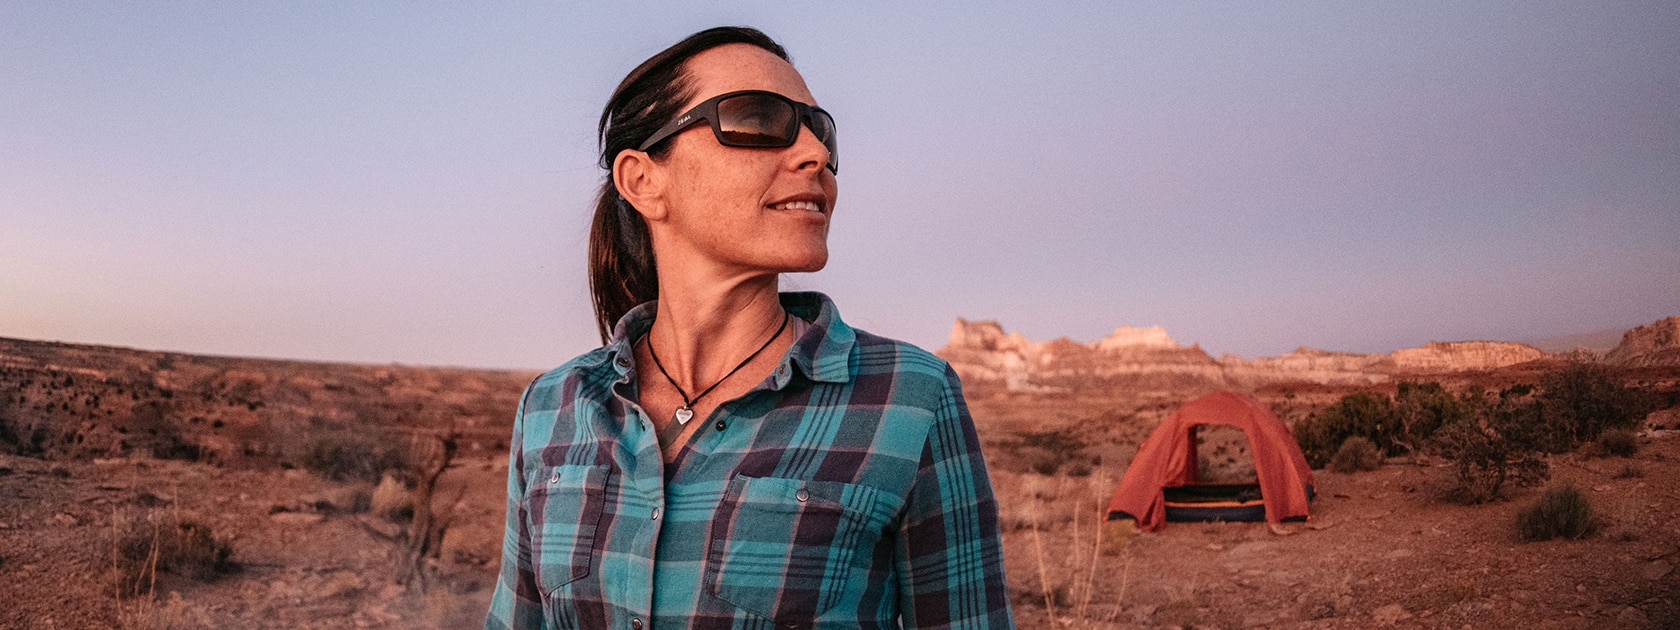 woman in blue shirt and sunglasses standing in the desert near her tent